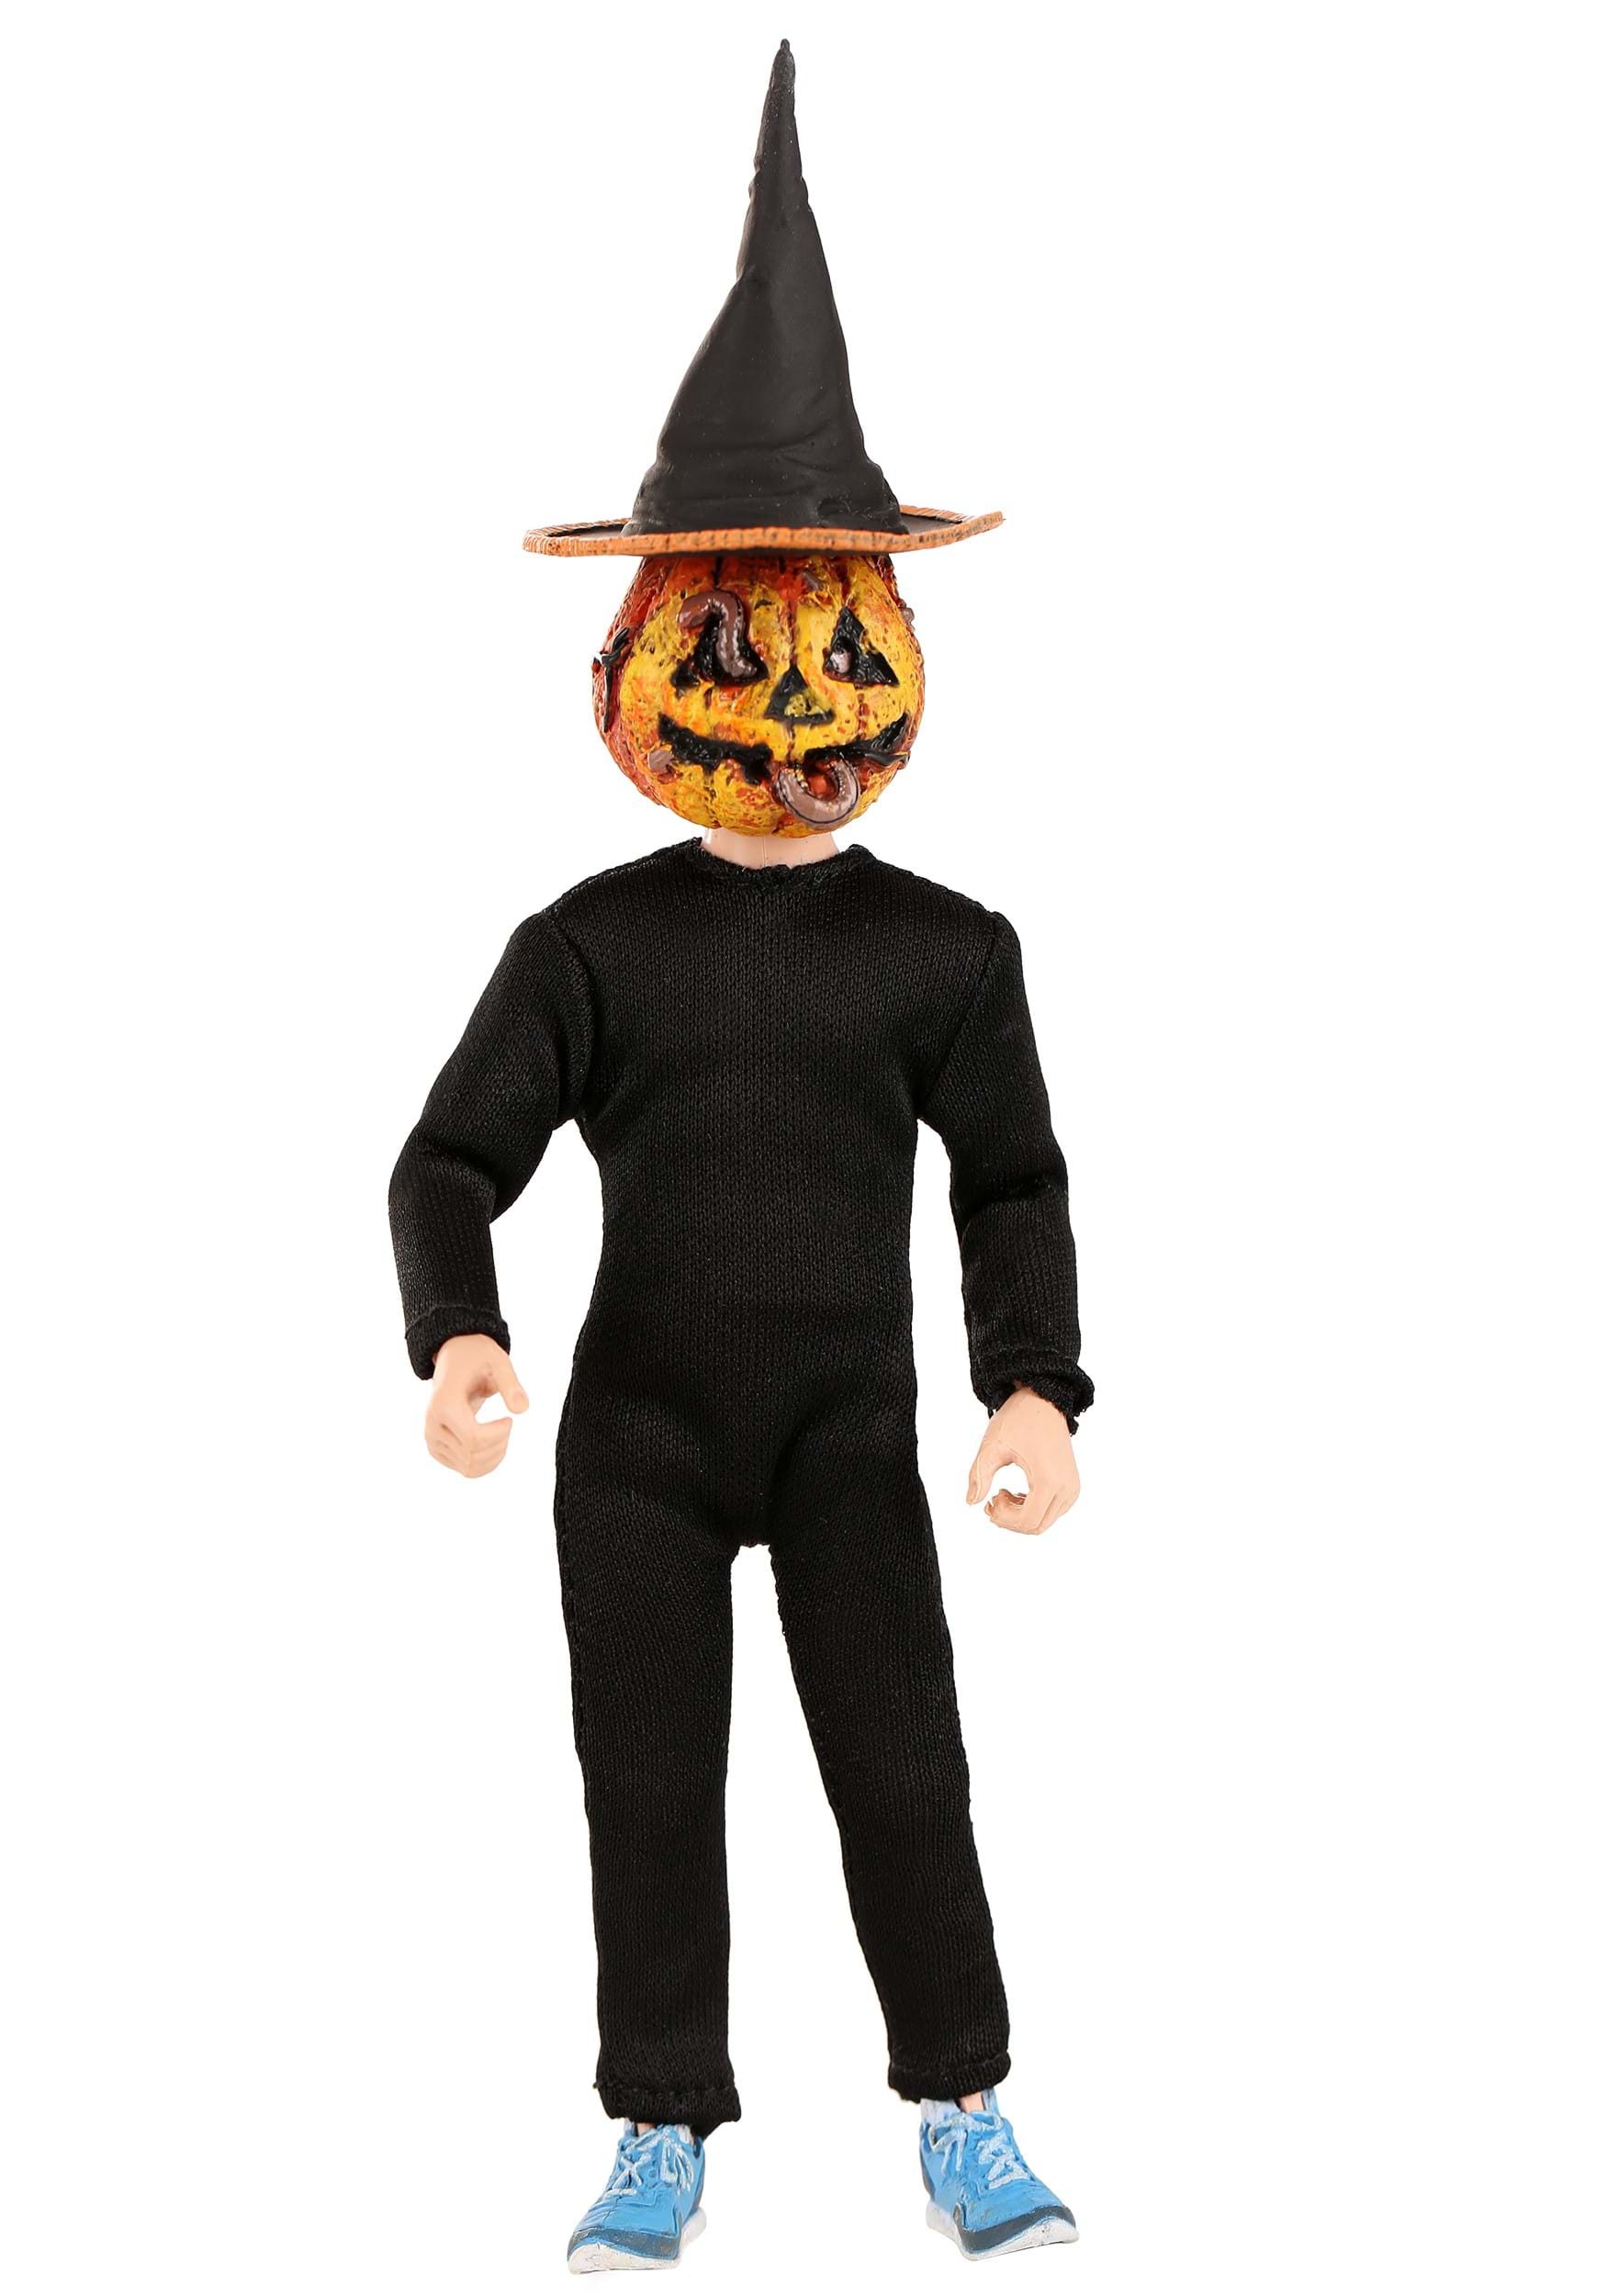 Halloween 3 - Season Of The Witch 3 Pack 8-Inch Scale Figure Set